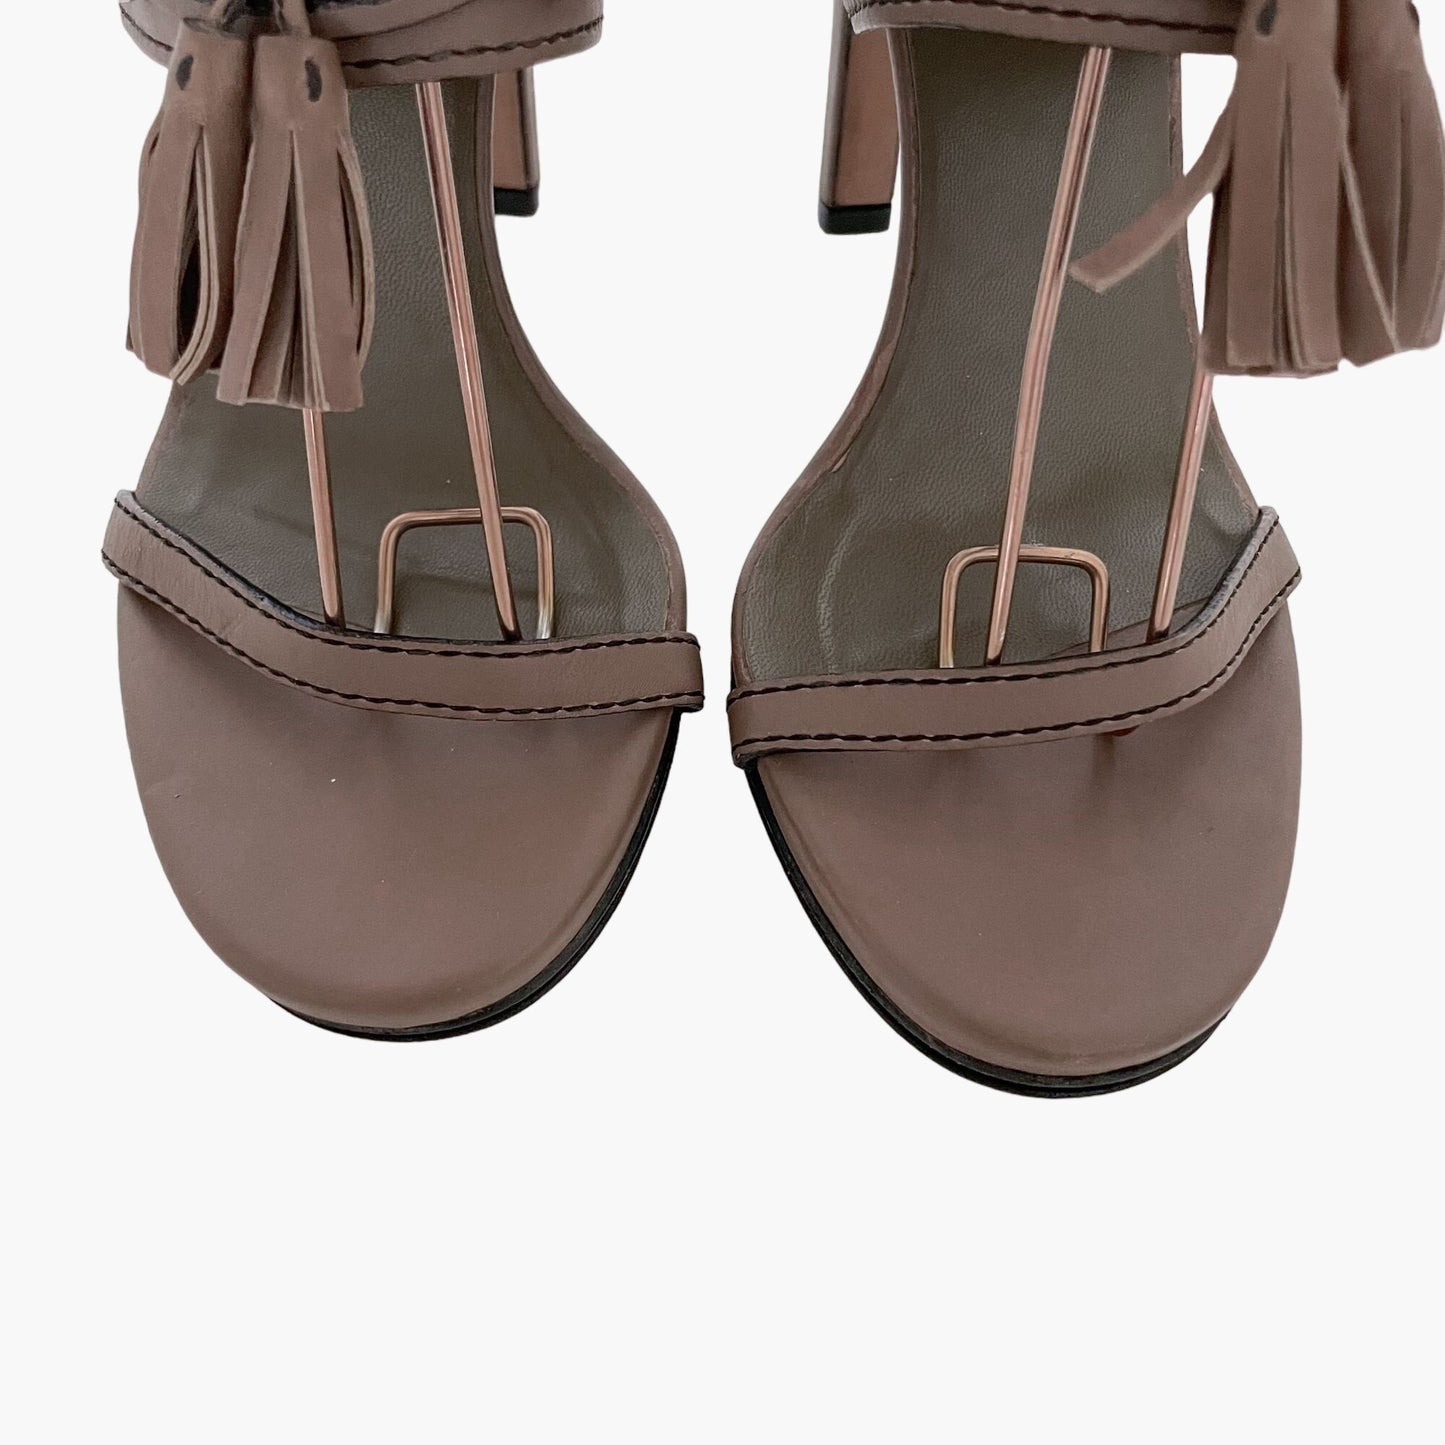 Gucci Emily Horsebit Tassel Sandals in Brown Leather Size 37.5